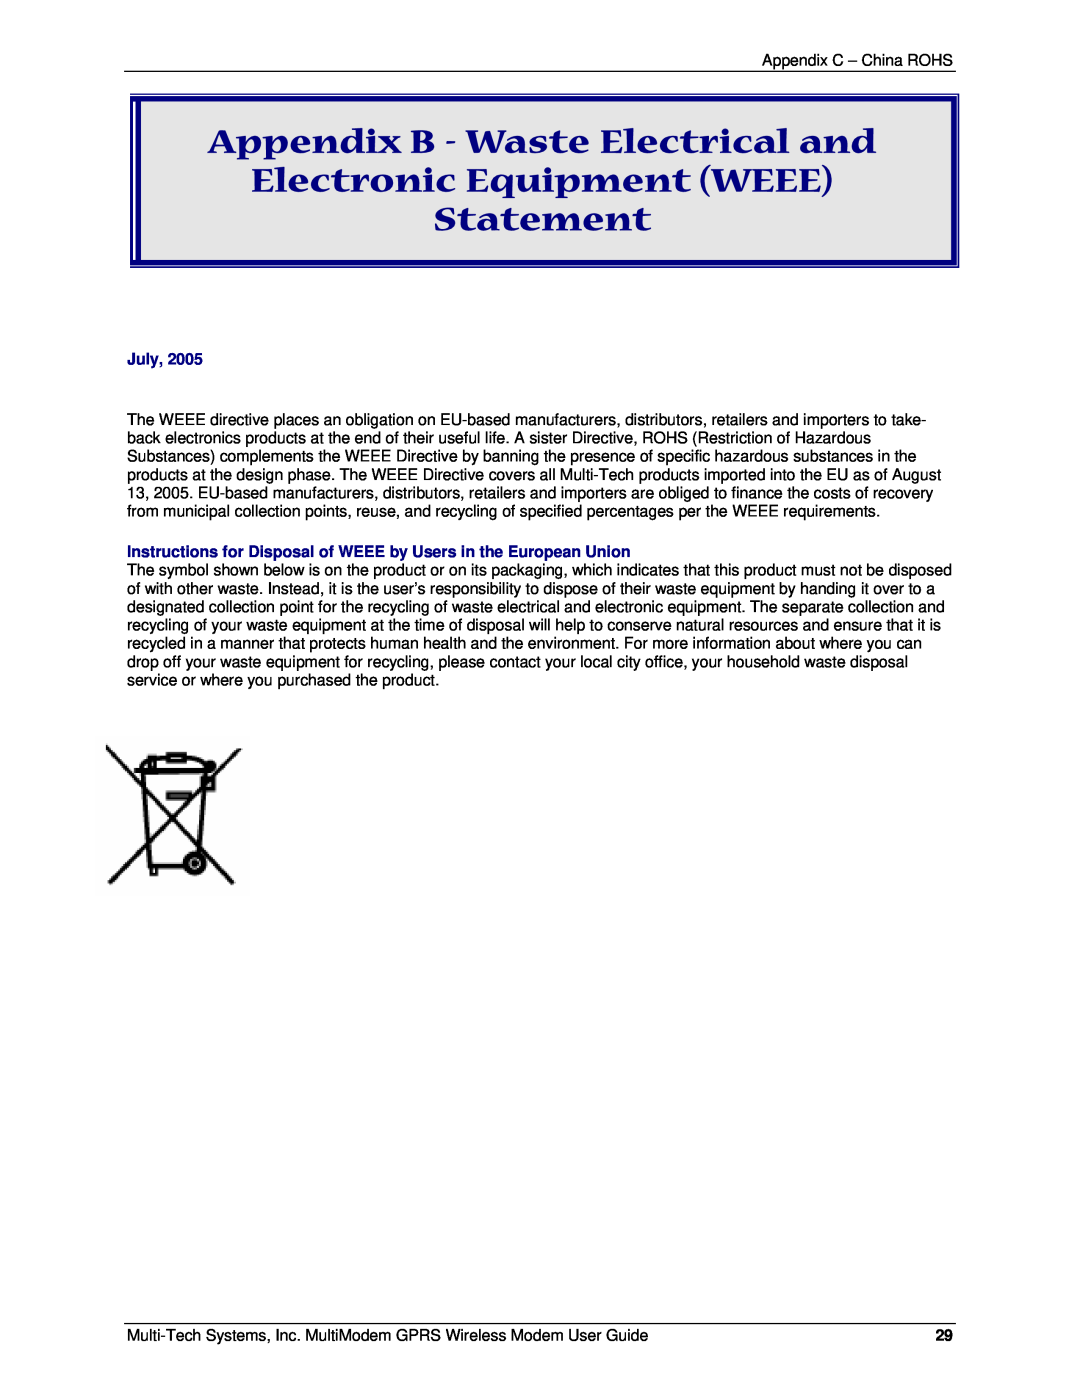 Multi-Tech Systems MTCBA-G-F4 manual Appendix B - Waste Electrical and Electronic Equipment WEEE Statement, July 